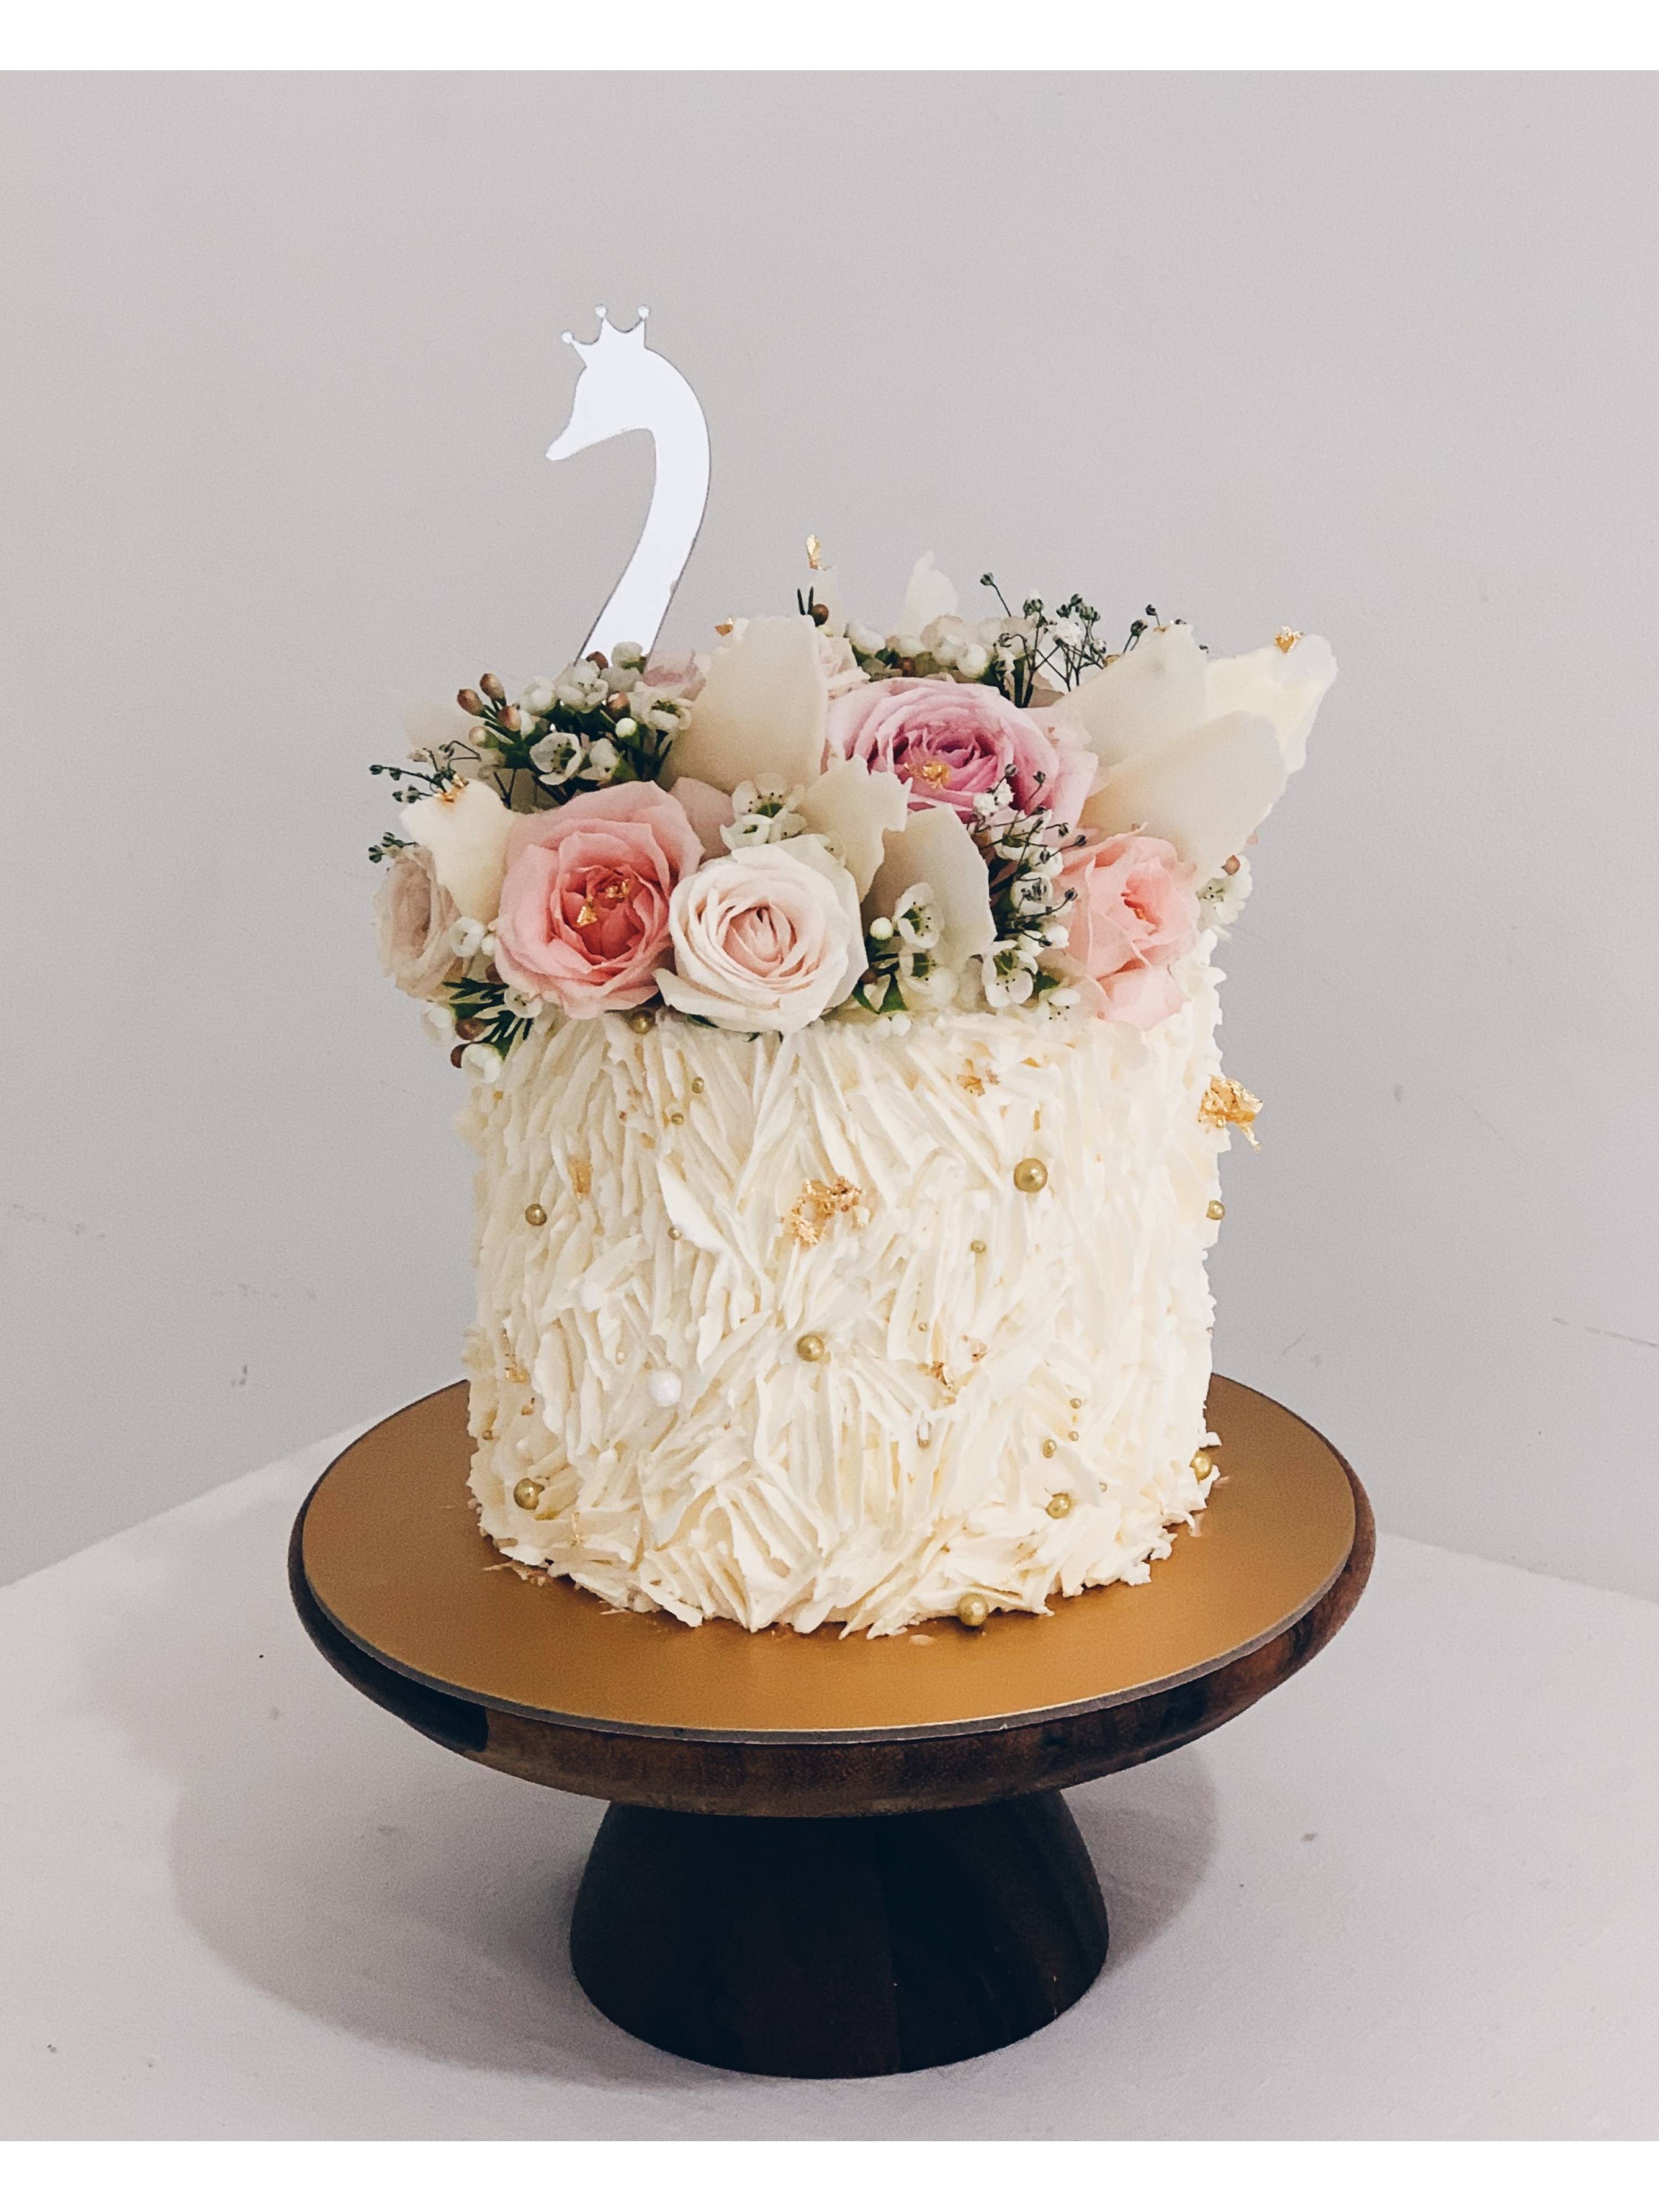 A13. Swan Floral Cake